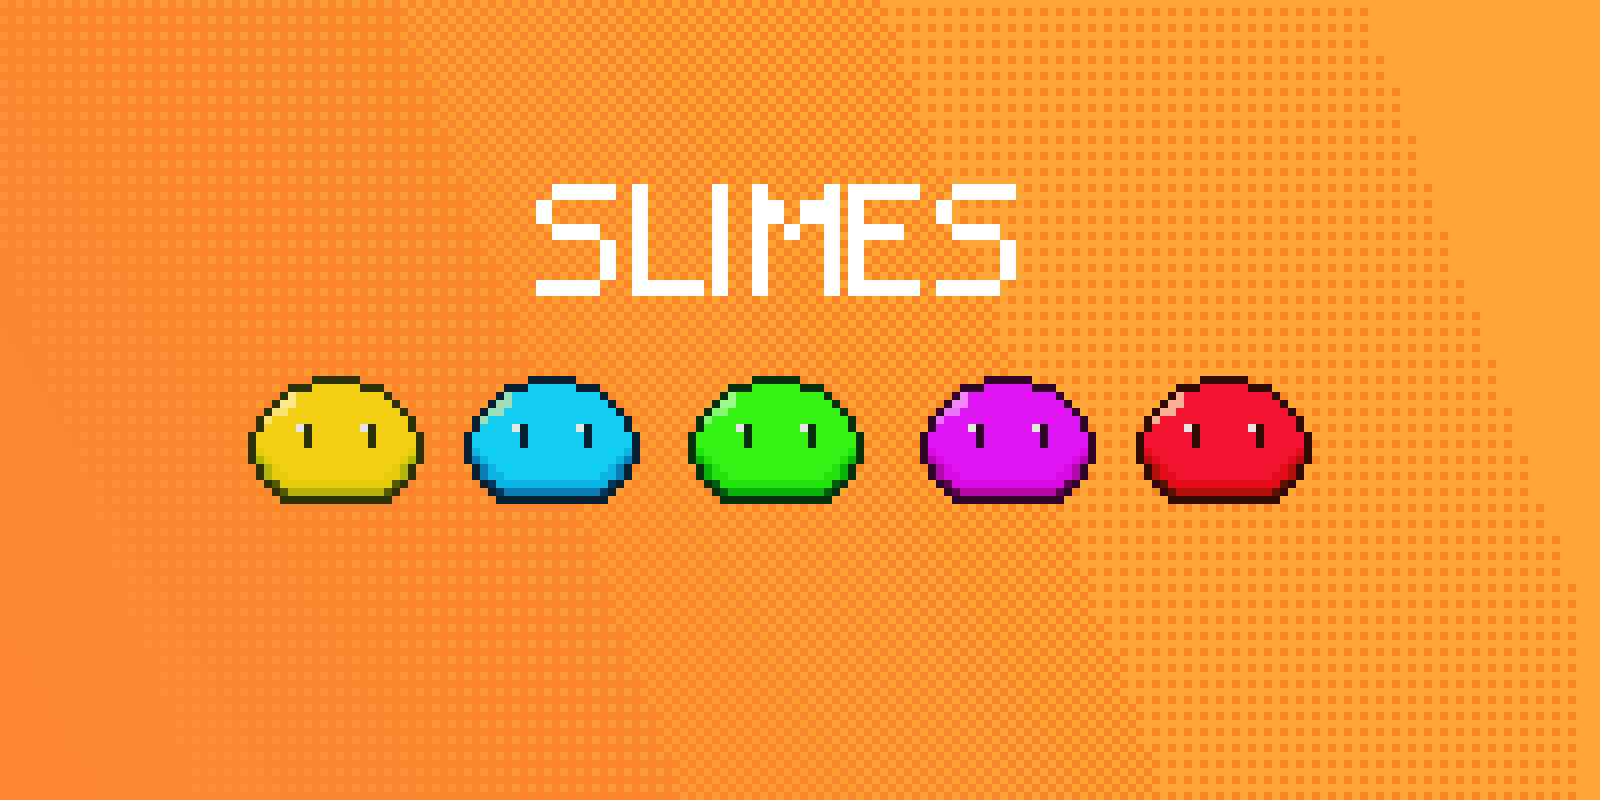 Free Slimes with Animation Assets (32X32)